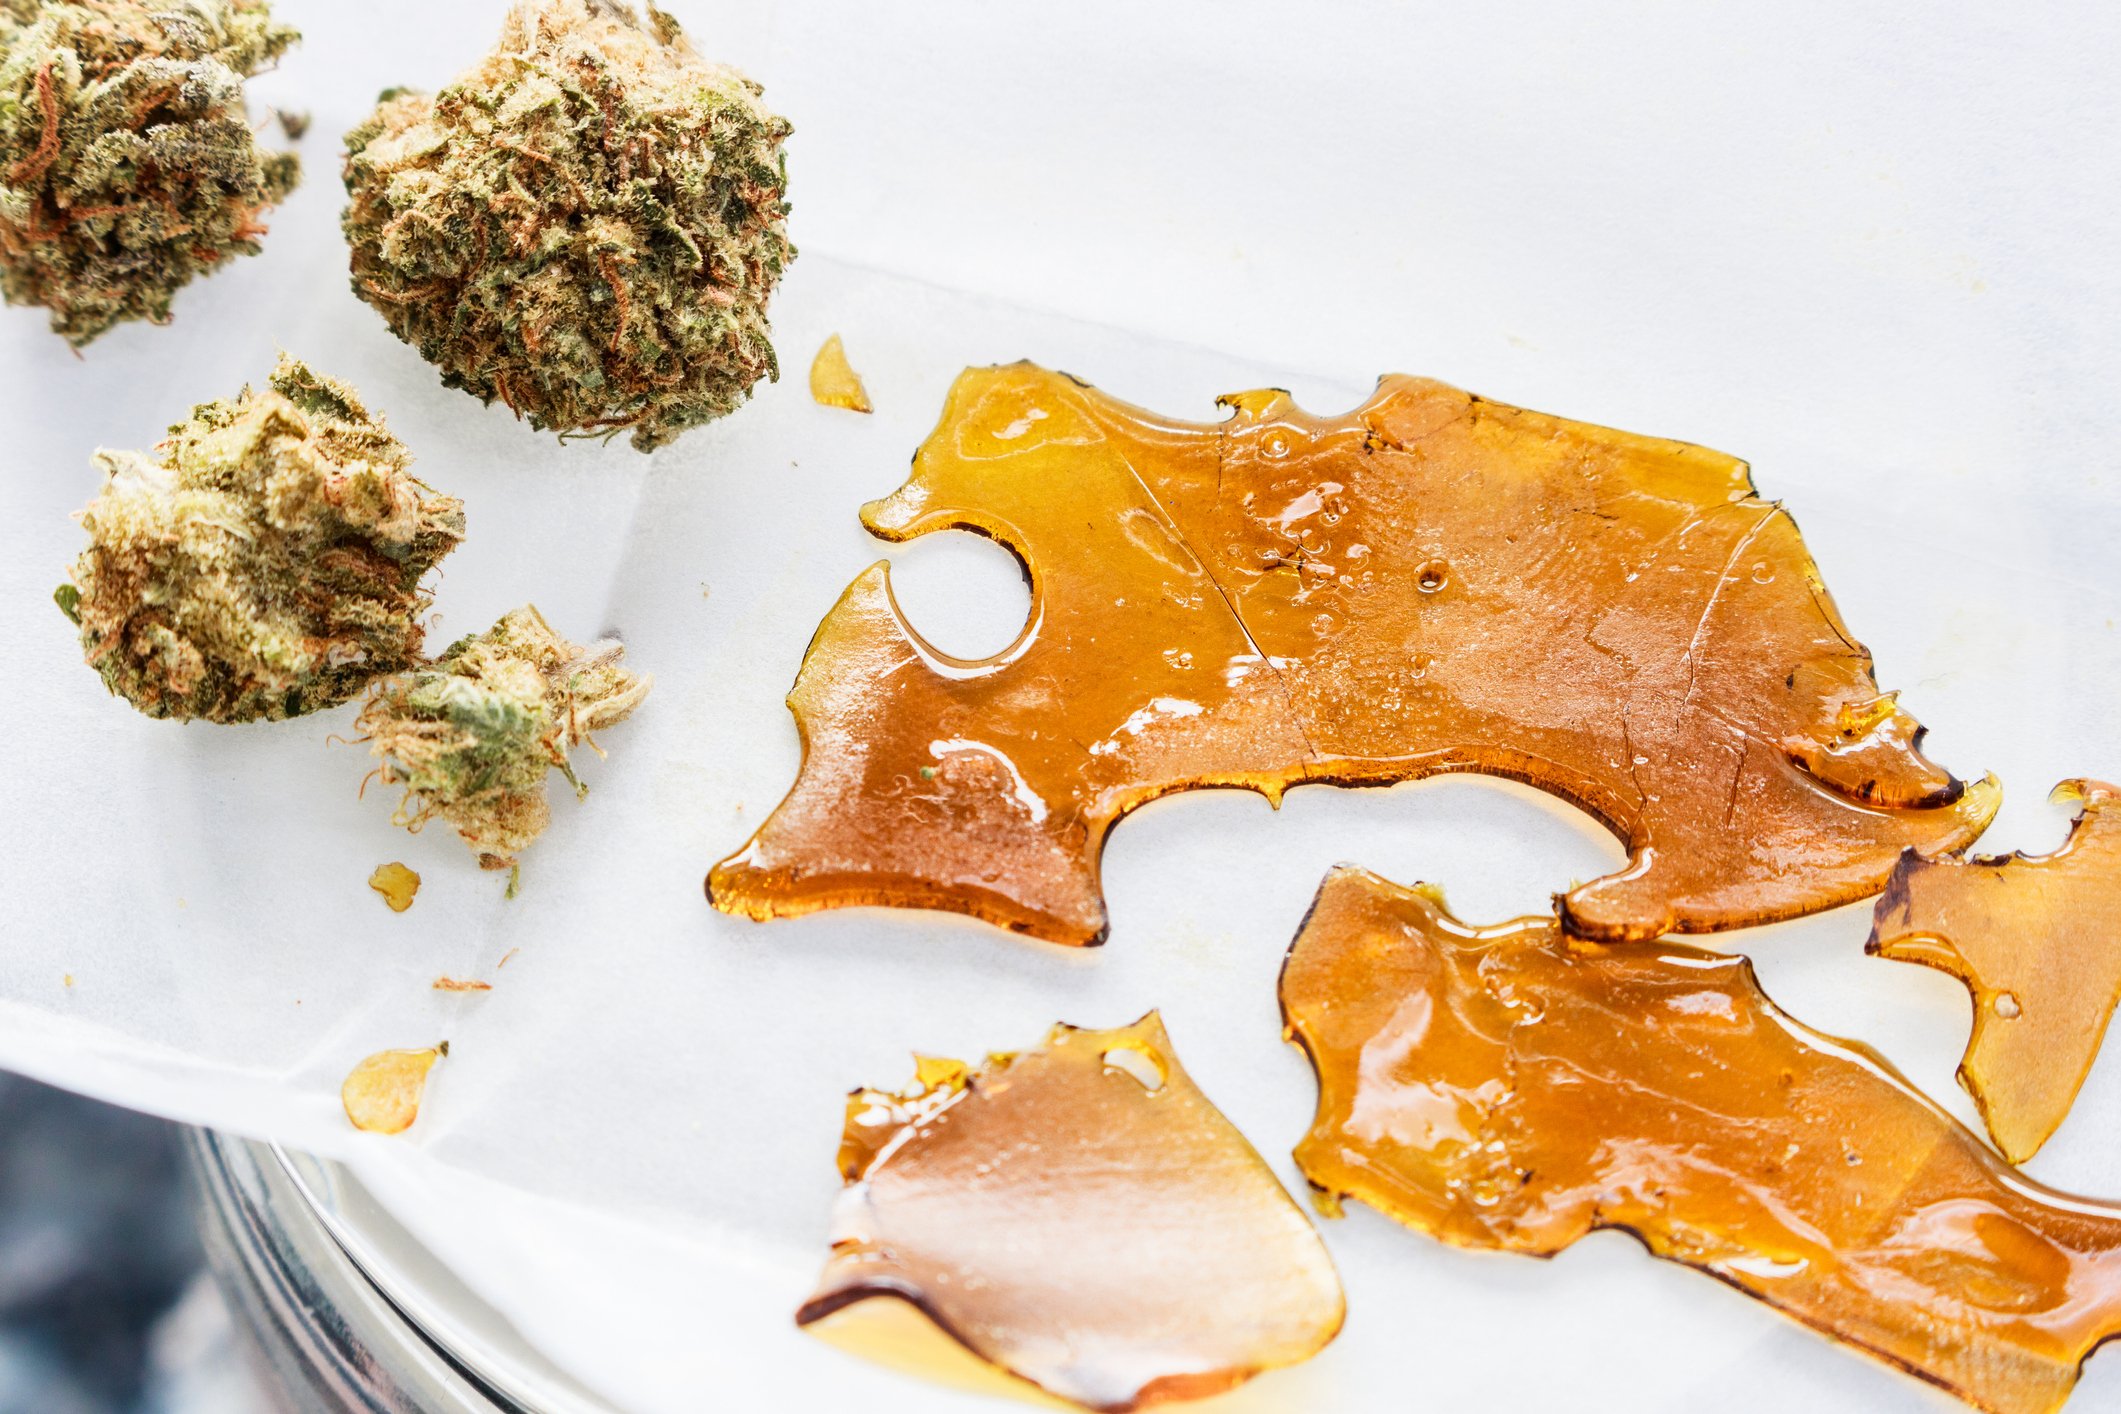 THC:CBD Extract Concentrate Shatter